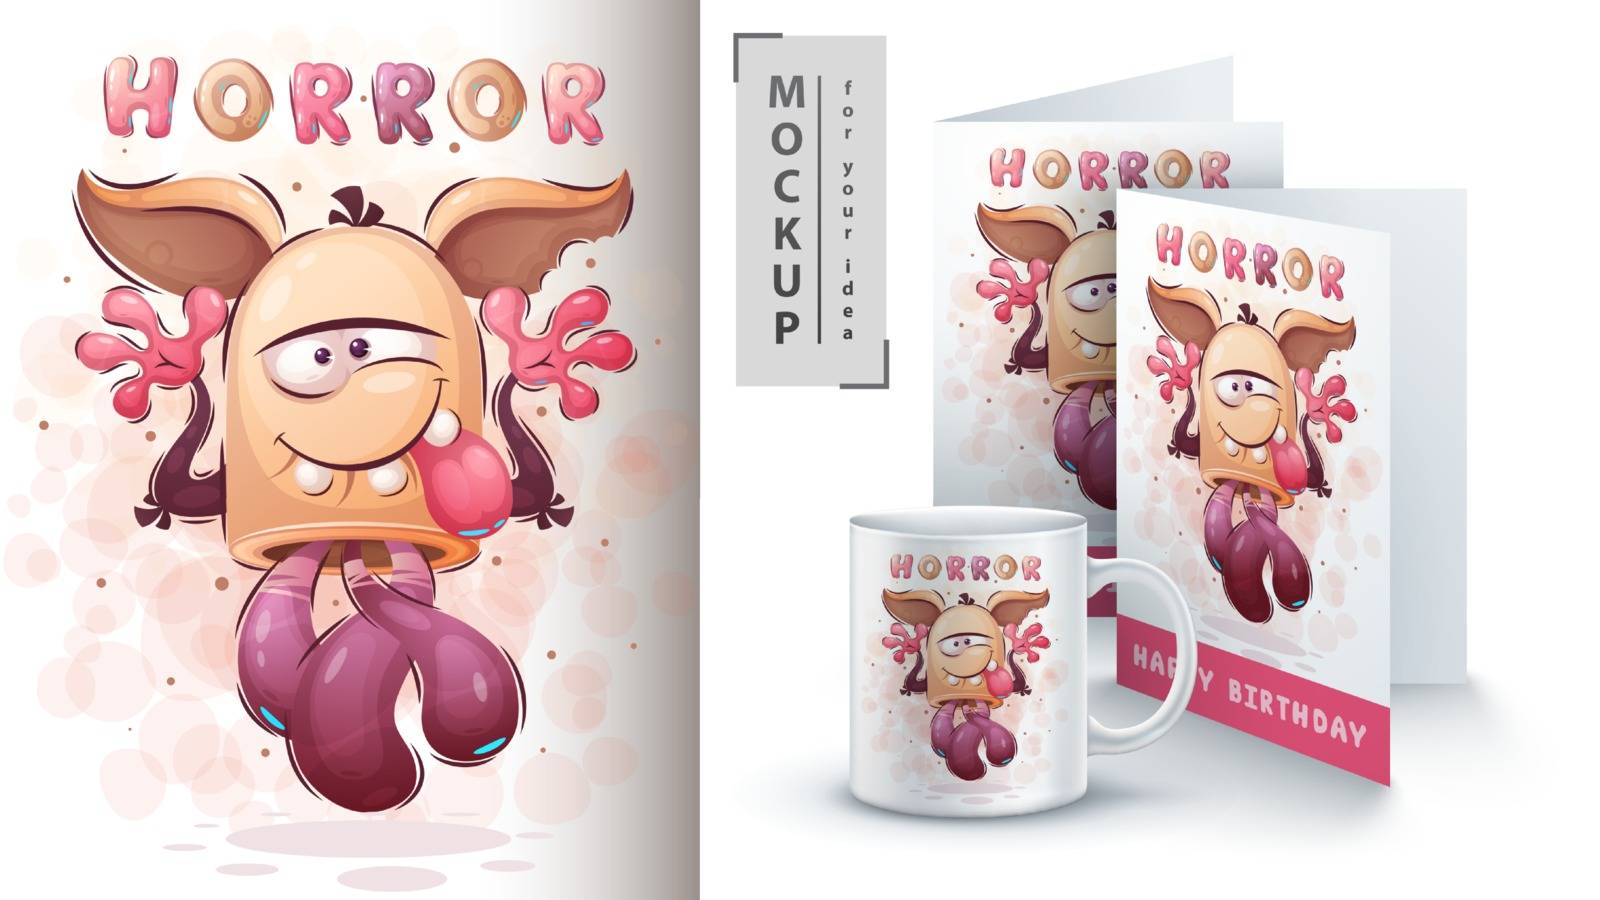 Cute monster - poster and merchandising. by rwgusev